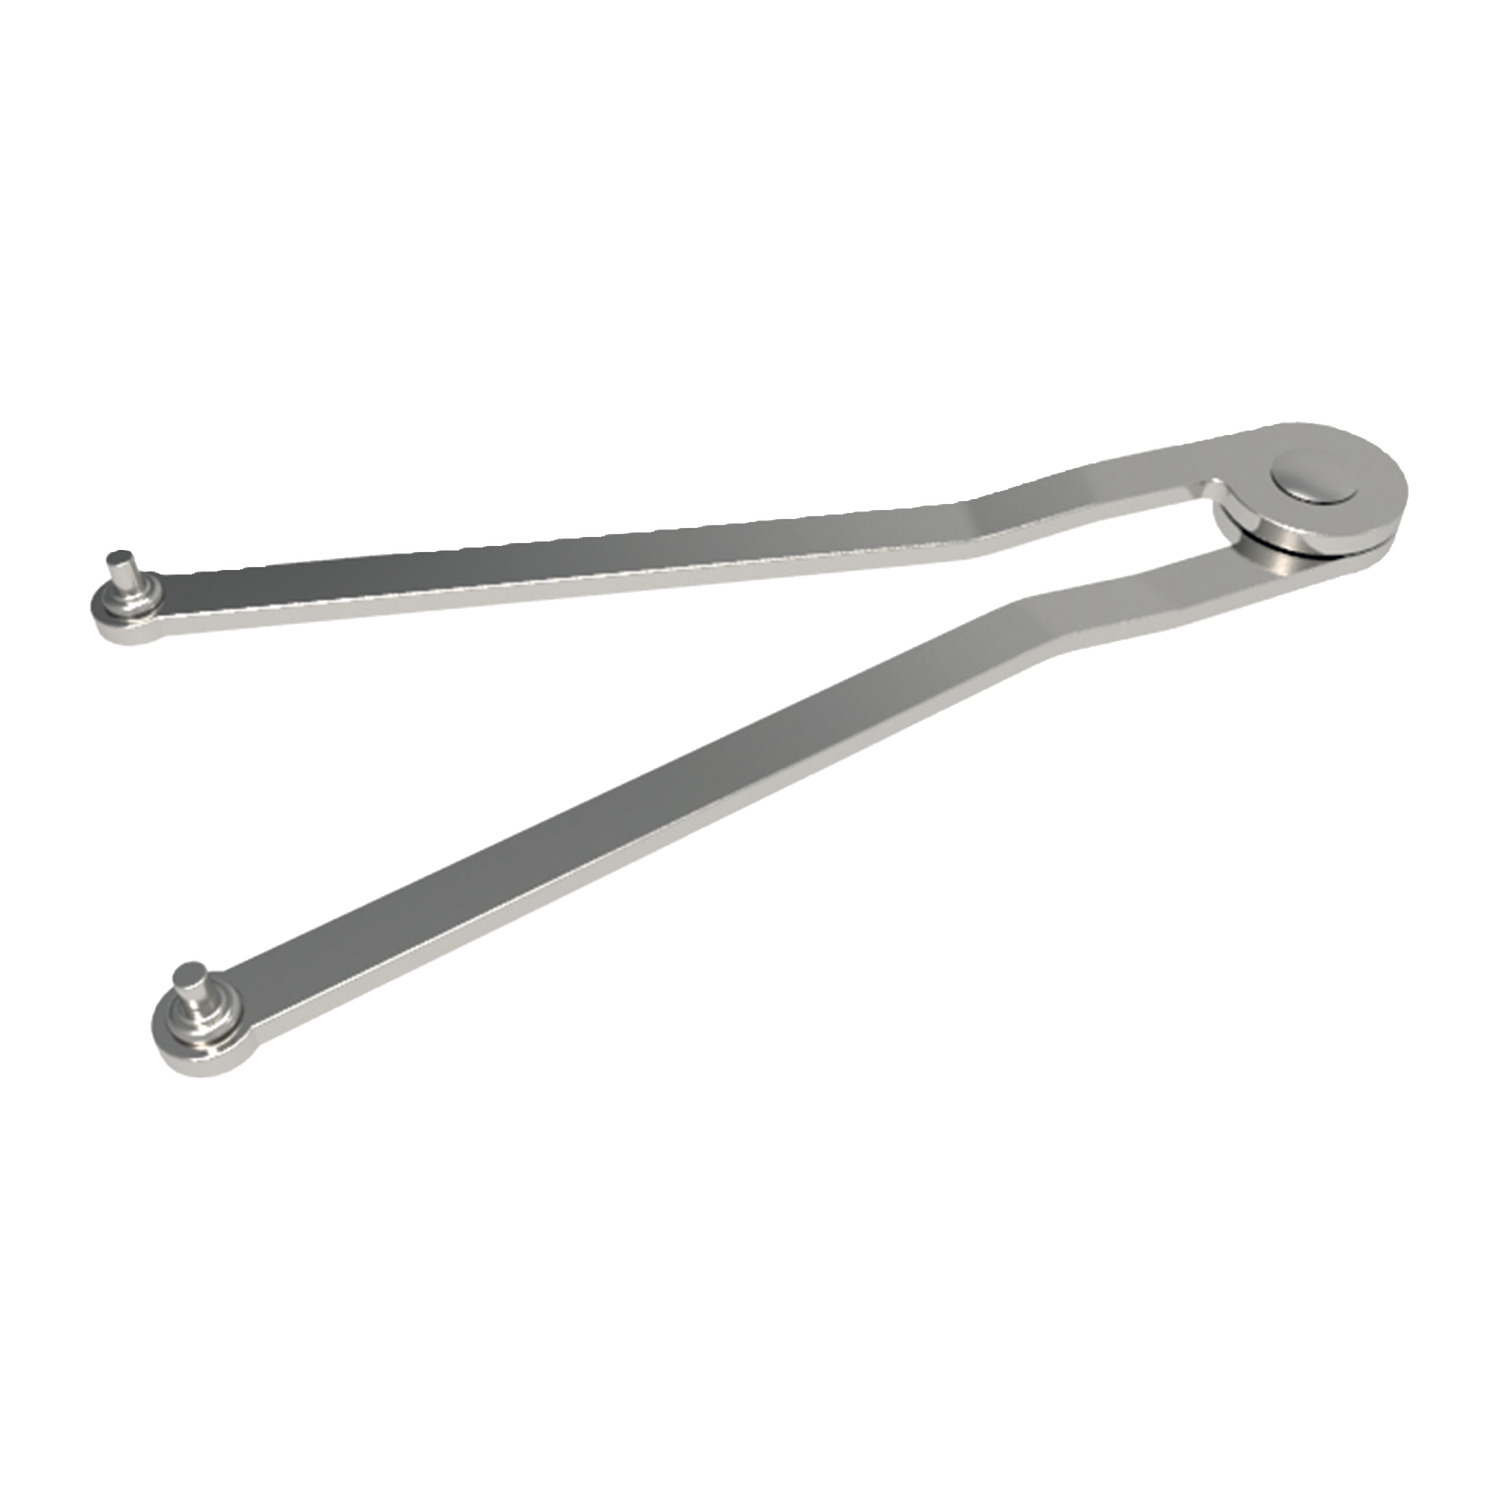 94000.2 - Adjustable Pin Face Spanners